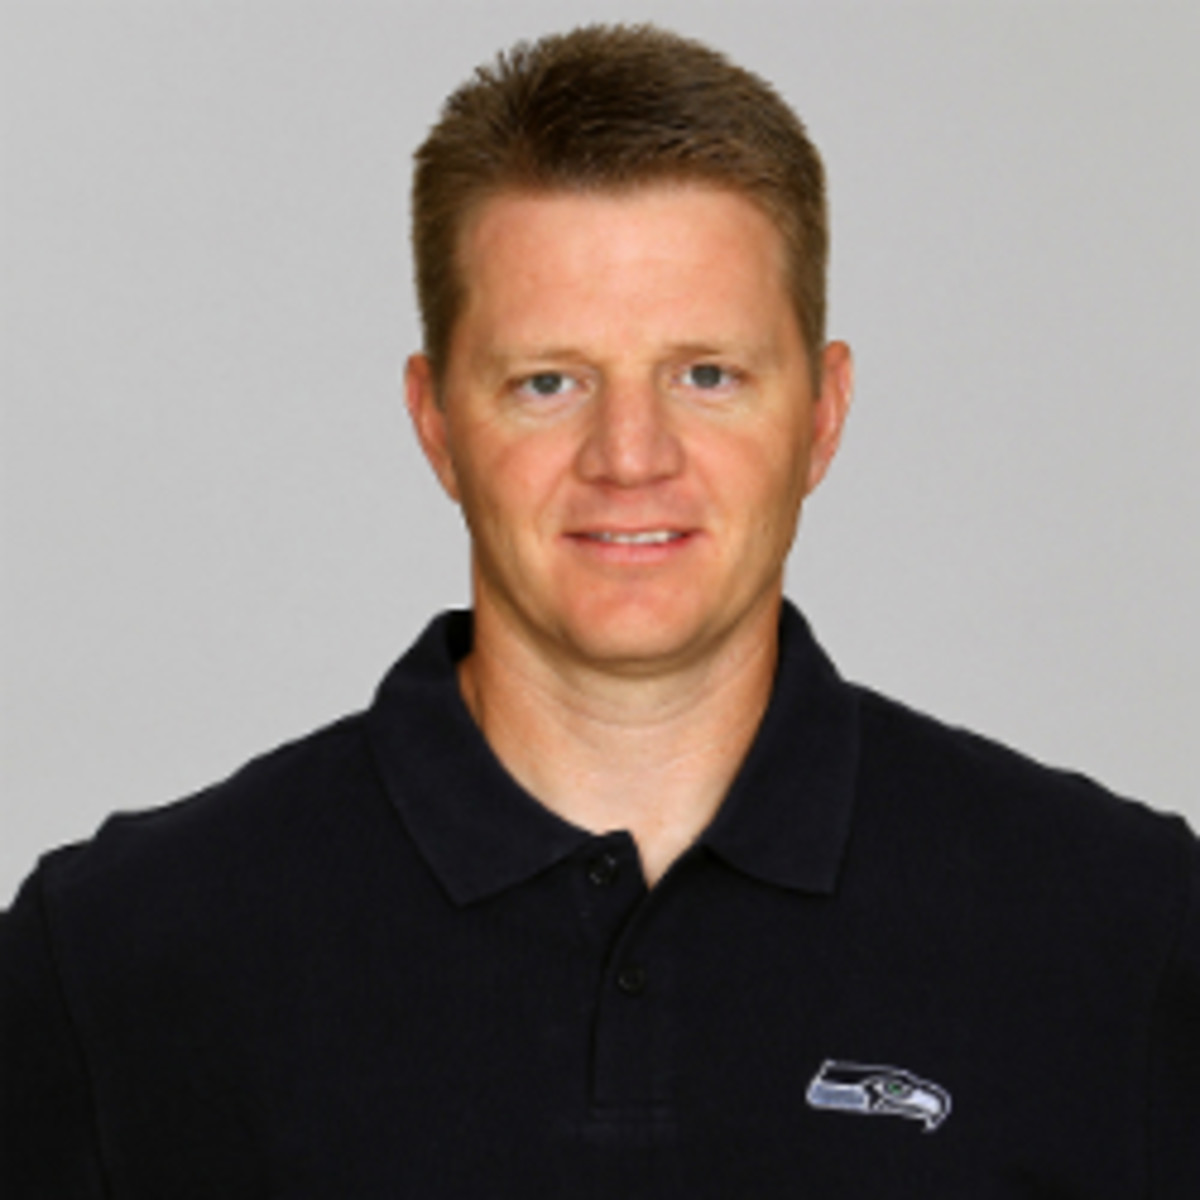 The Bears will reportedly interview Seahawks offensive coordinator Darrell Bevell.